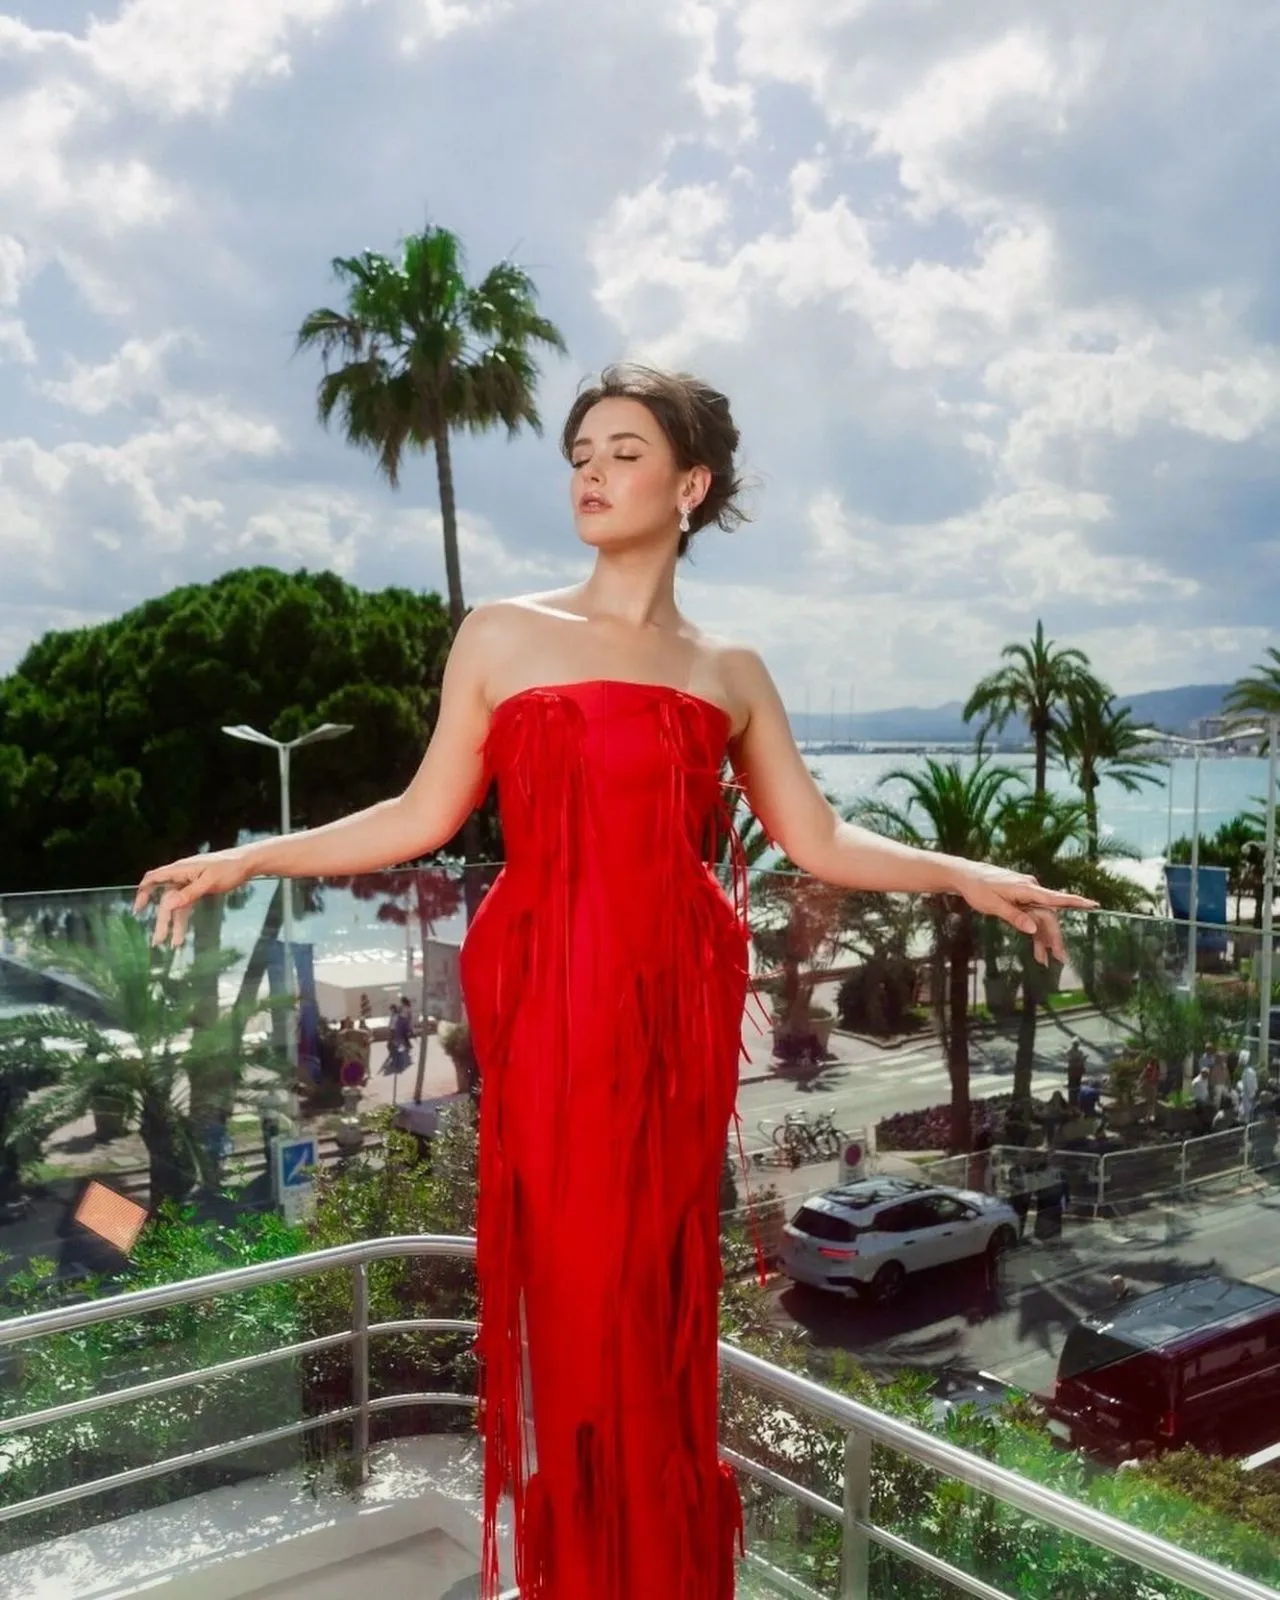 KATHERINE LANGFORD AT CANNES FILM FESTIVAL PHOTOSHOOT MAY 20242